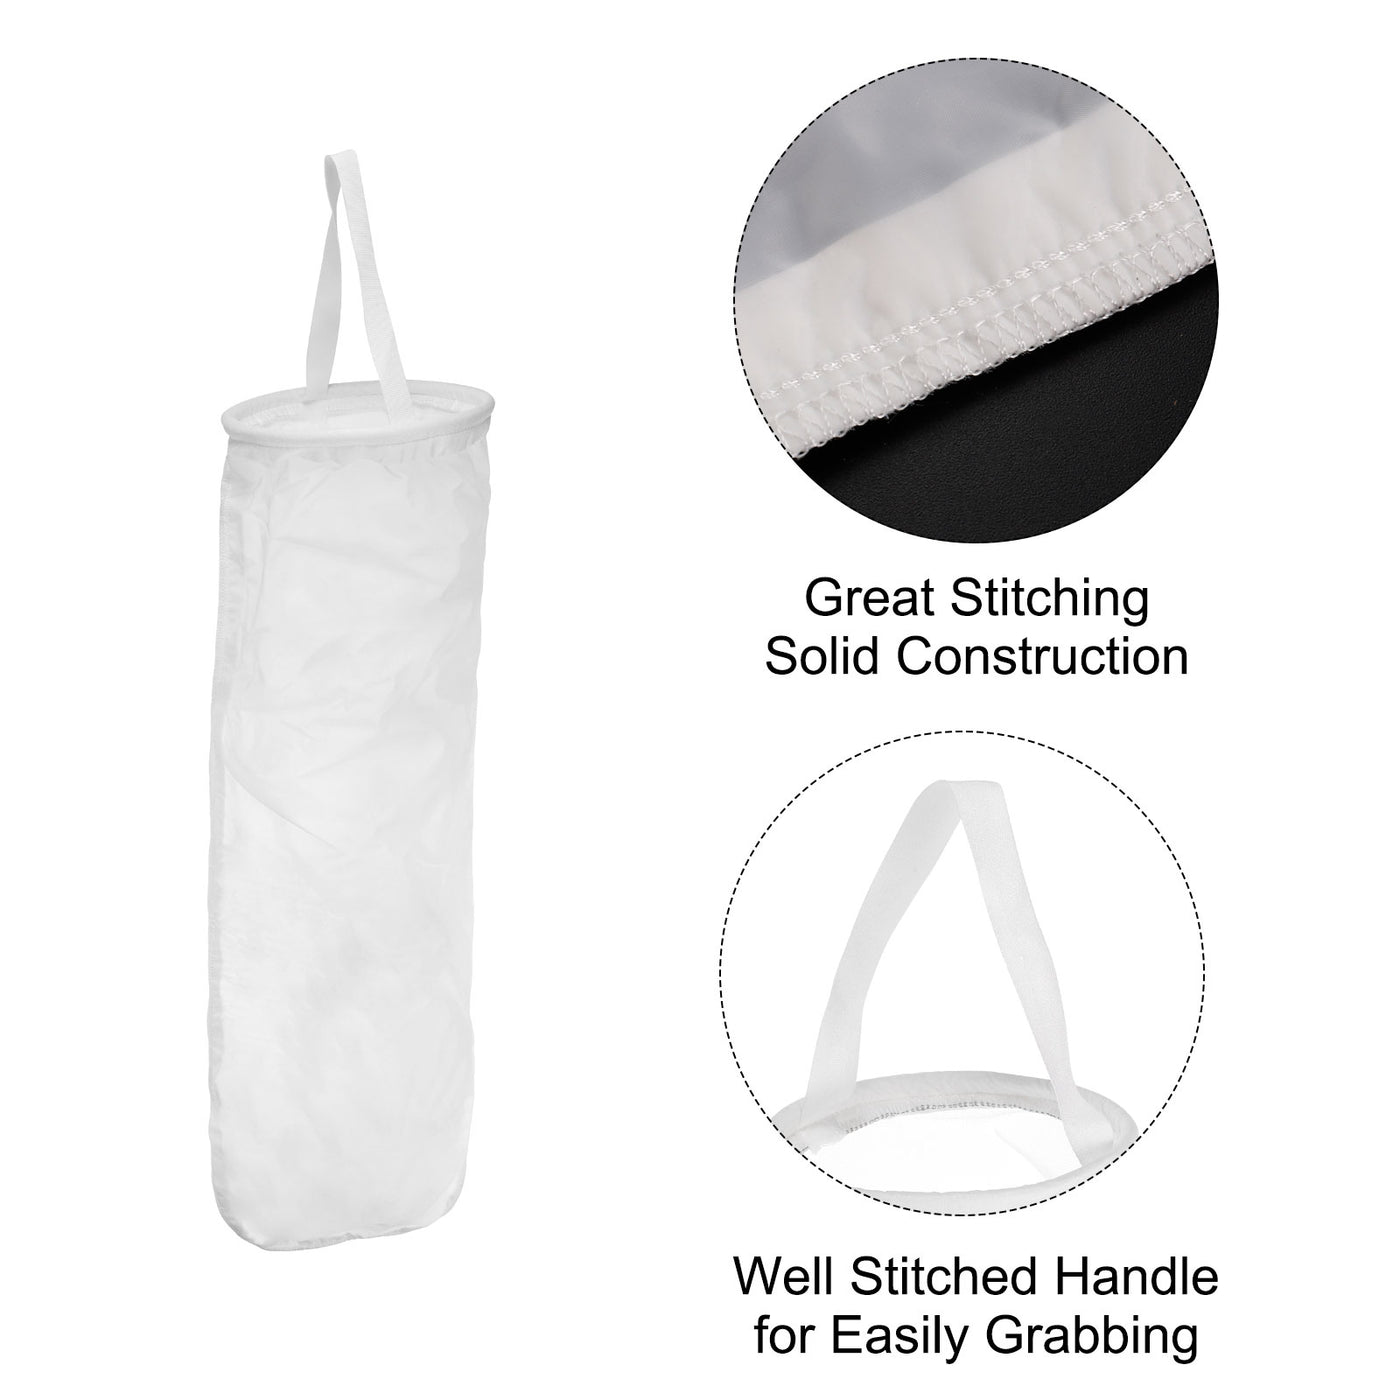 uxcell Uxcell Paint Filter Bag 300 Mesh (31.9"x7") Nylon Strainer for Filtering Paint